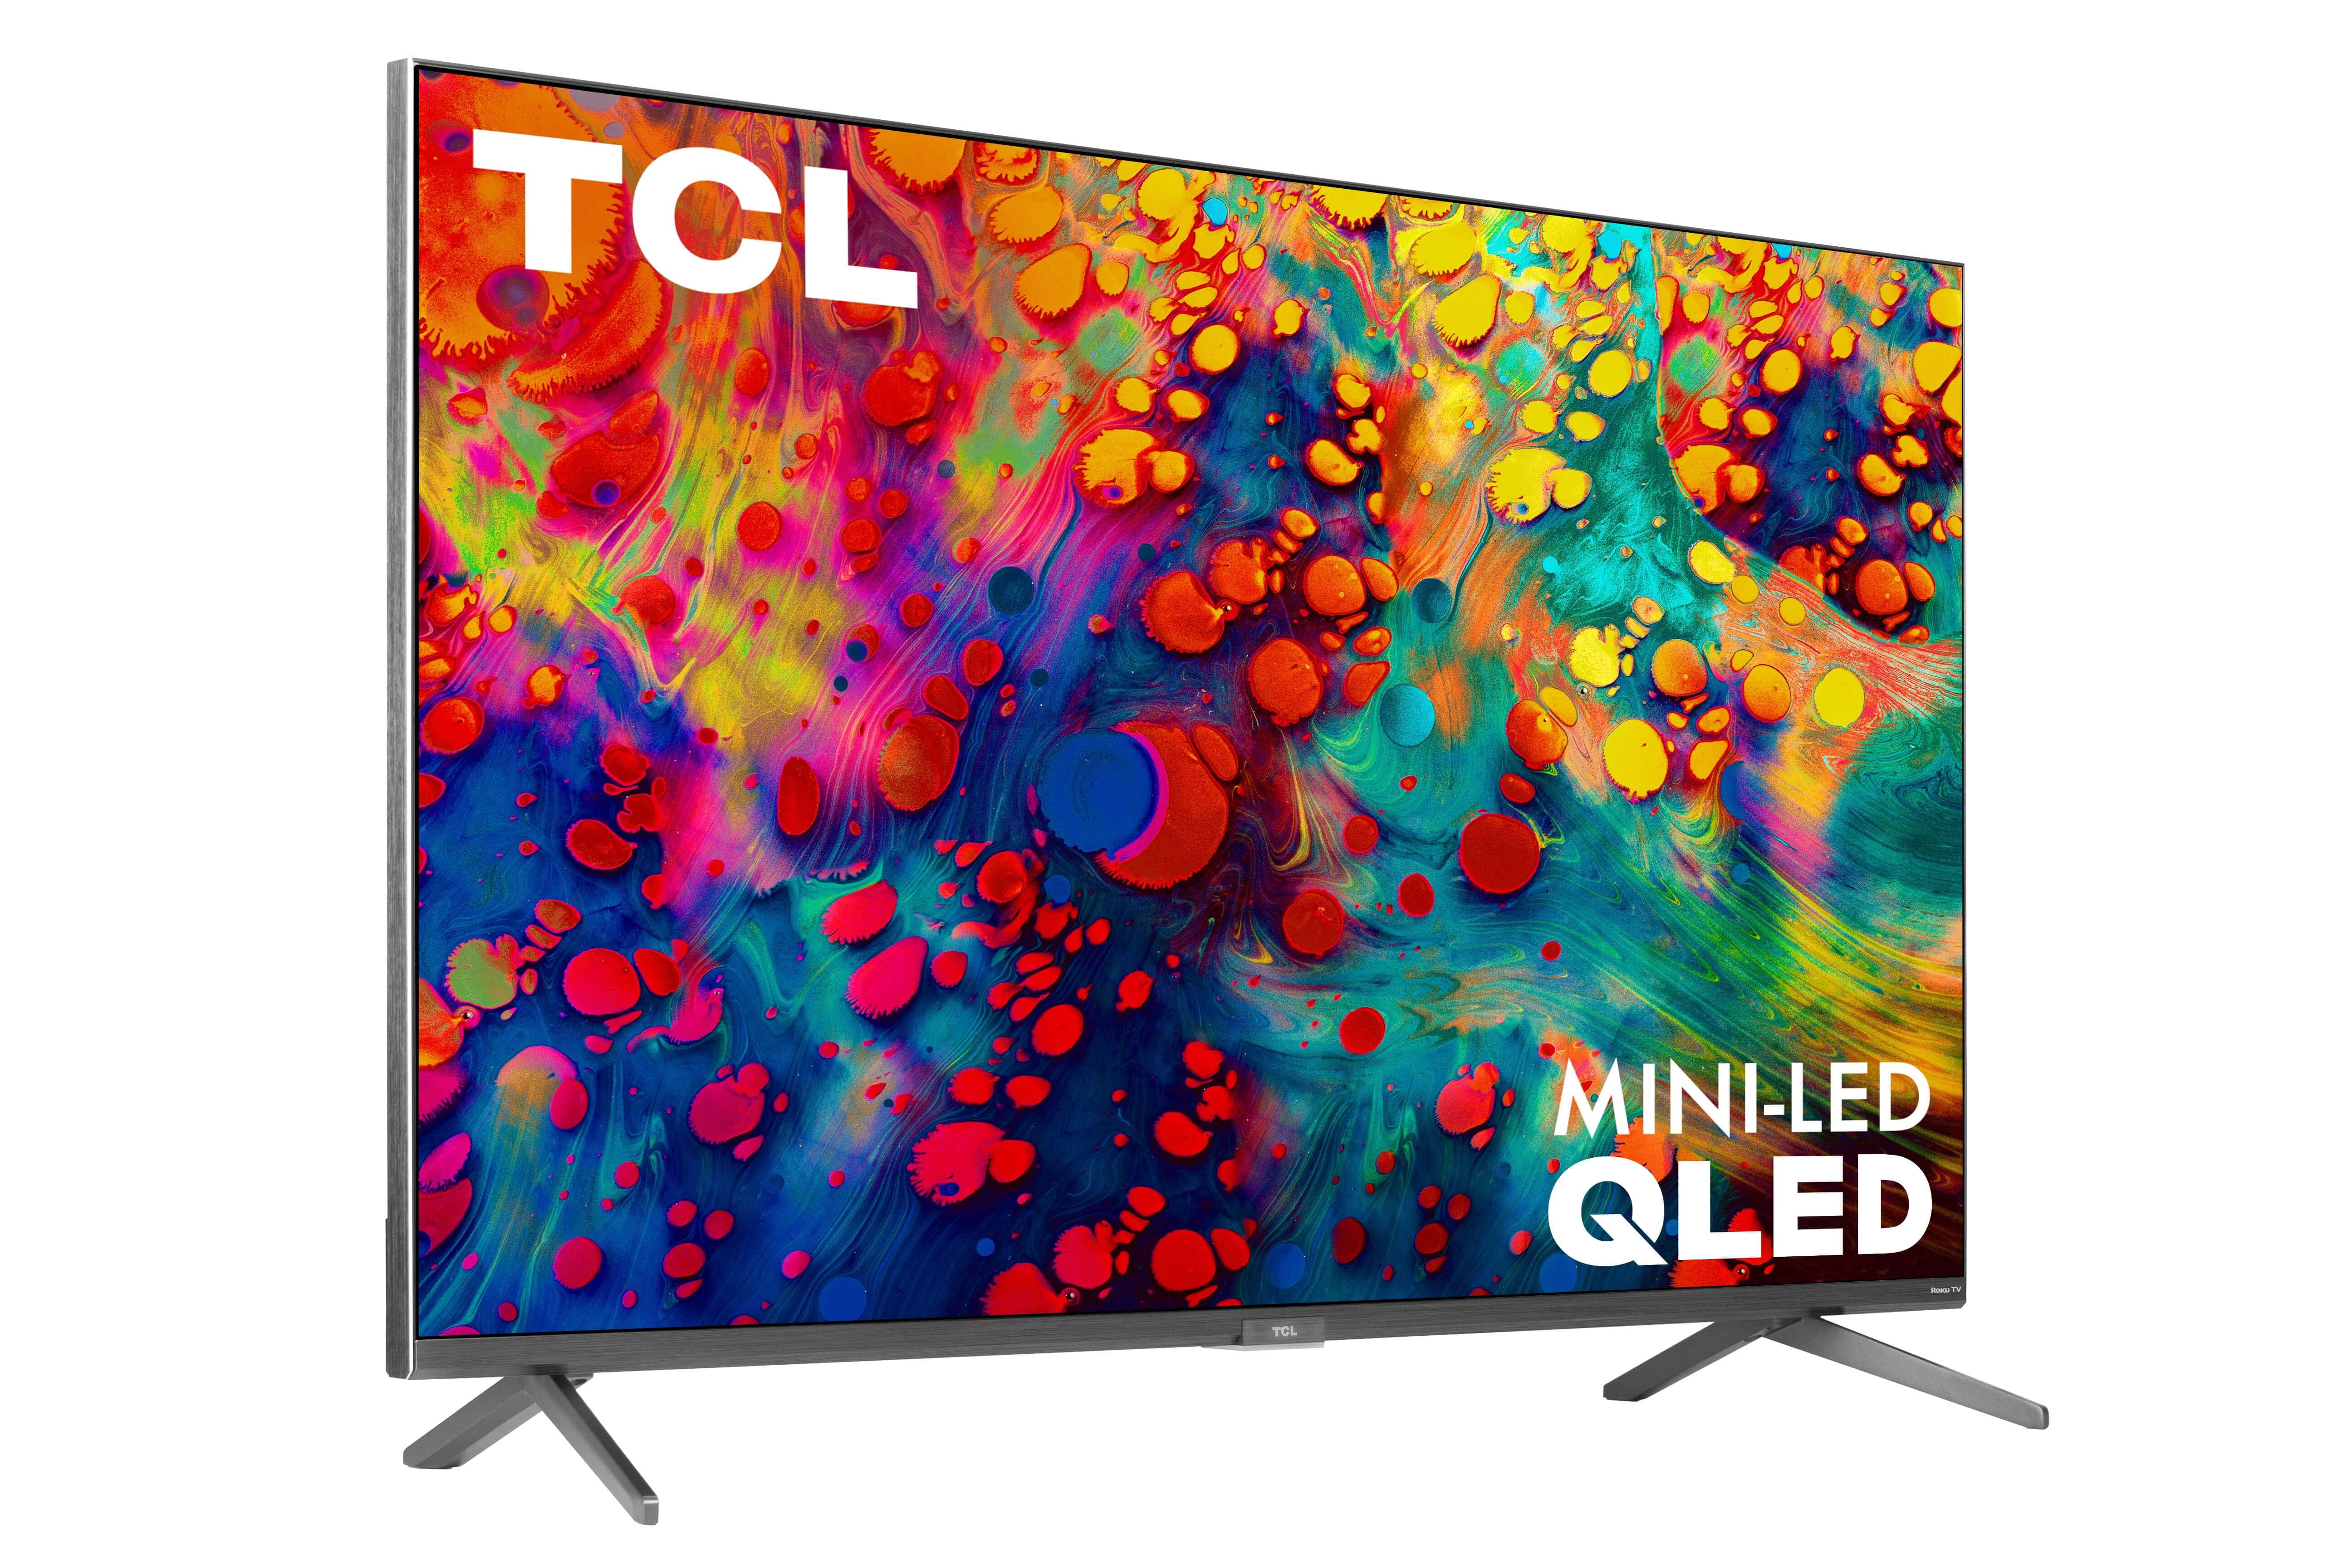  TCL 55R646 Smart TV Class 6-Series 4K UHD QLED Dolby Vision HDR  Smart Google TV - 55R646, negro : Electrónica